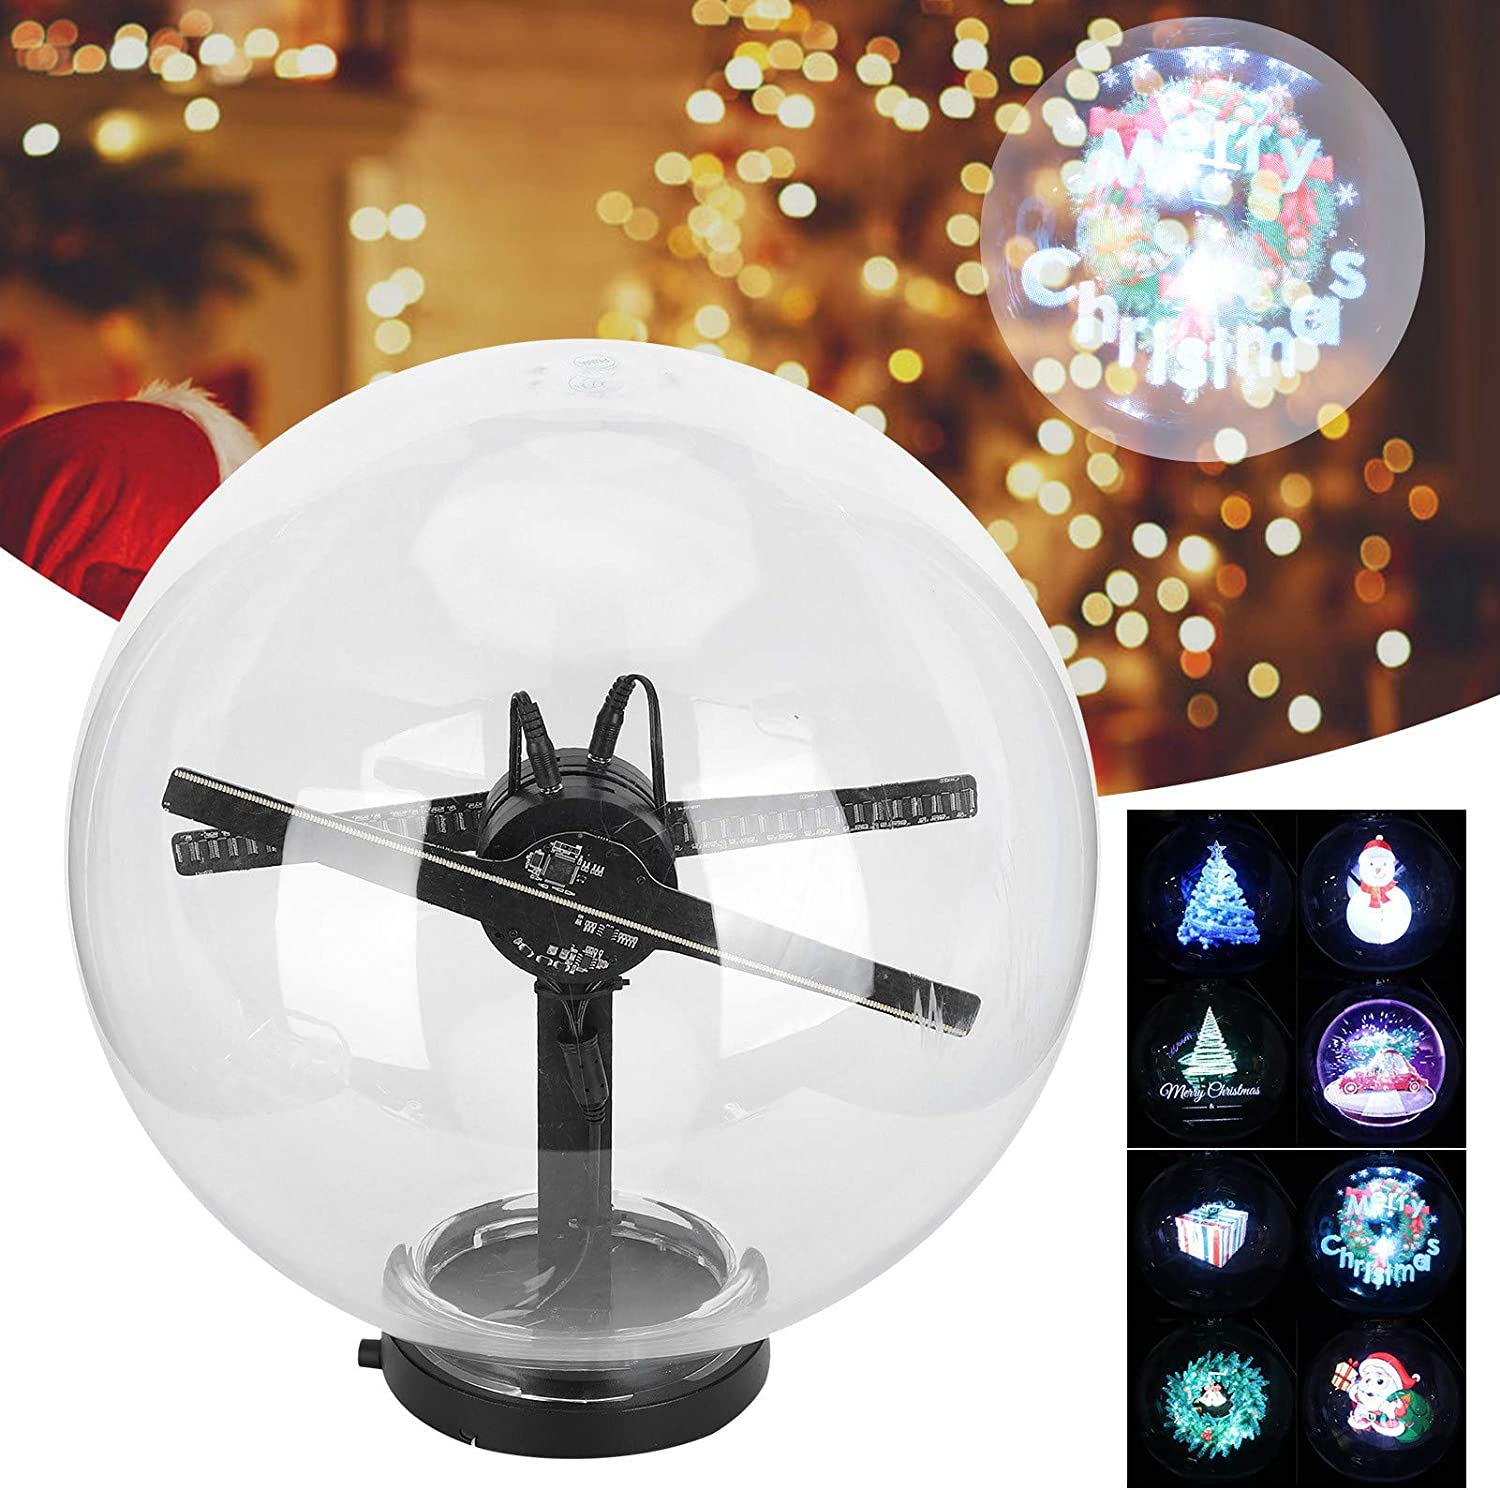 32cm Double Side Christmas Tree Ball With Cover